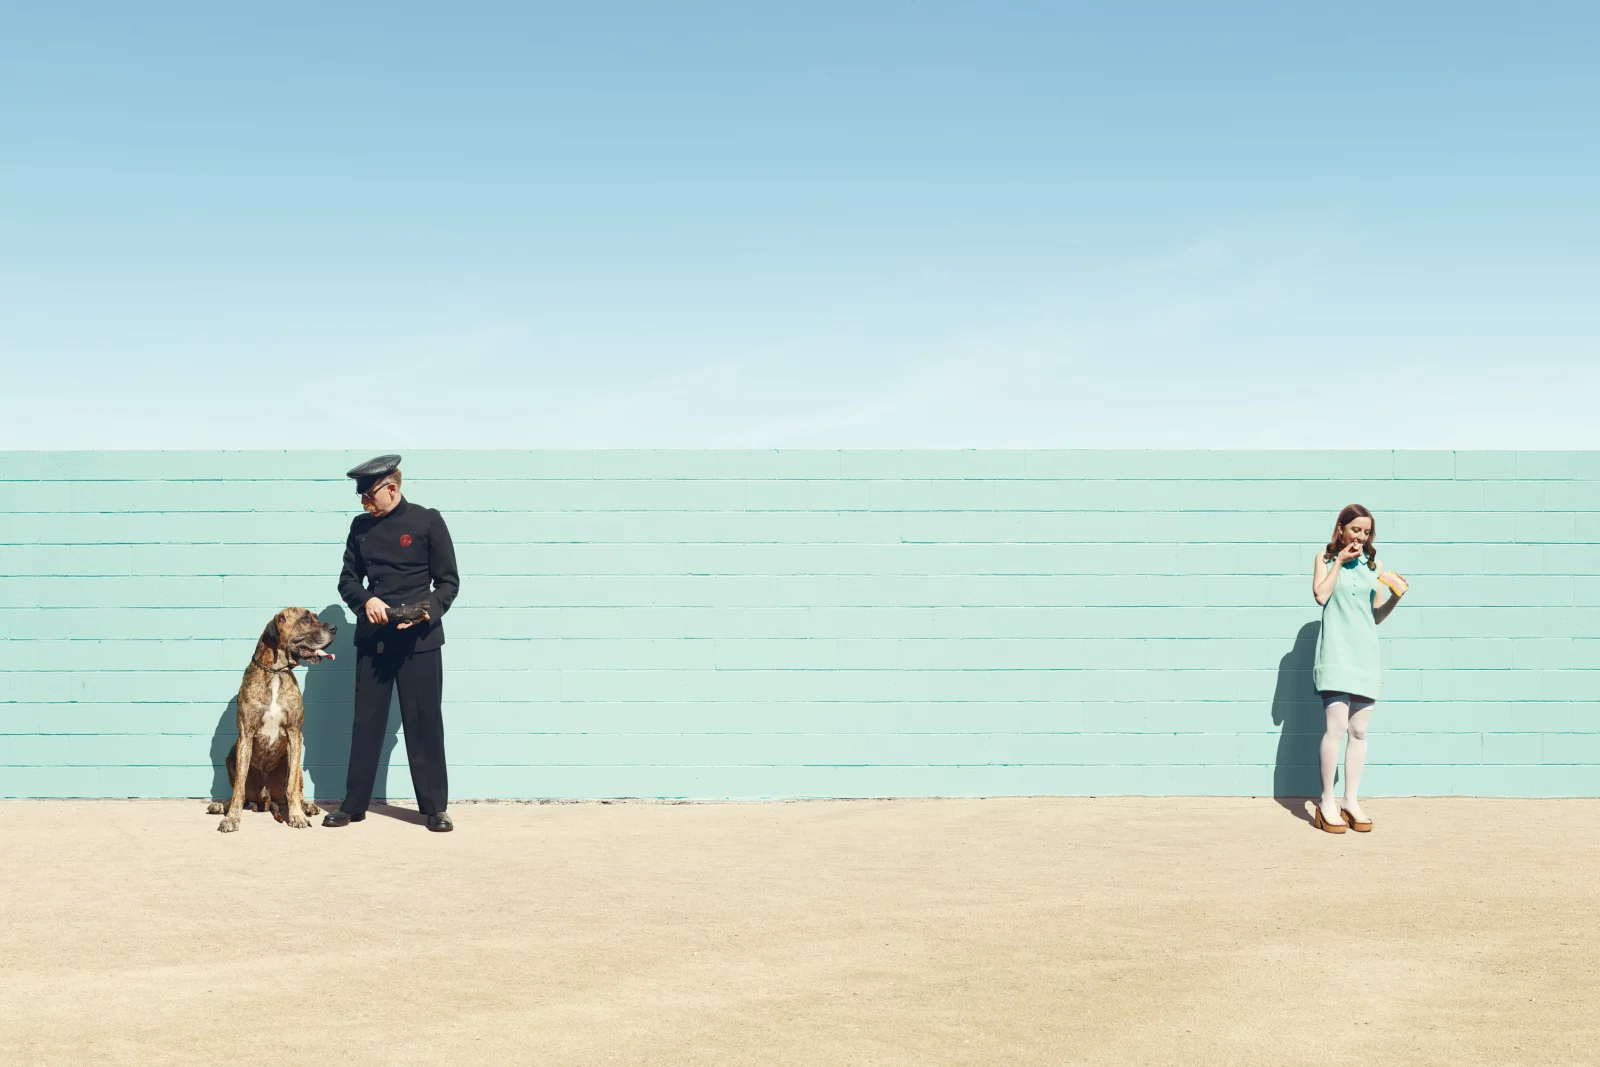 On Pleasure Grounds 9 by Clemens ASCHER